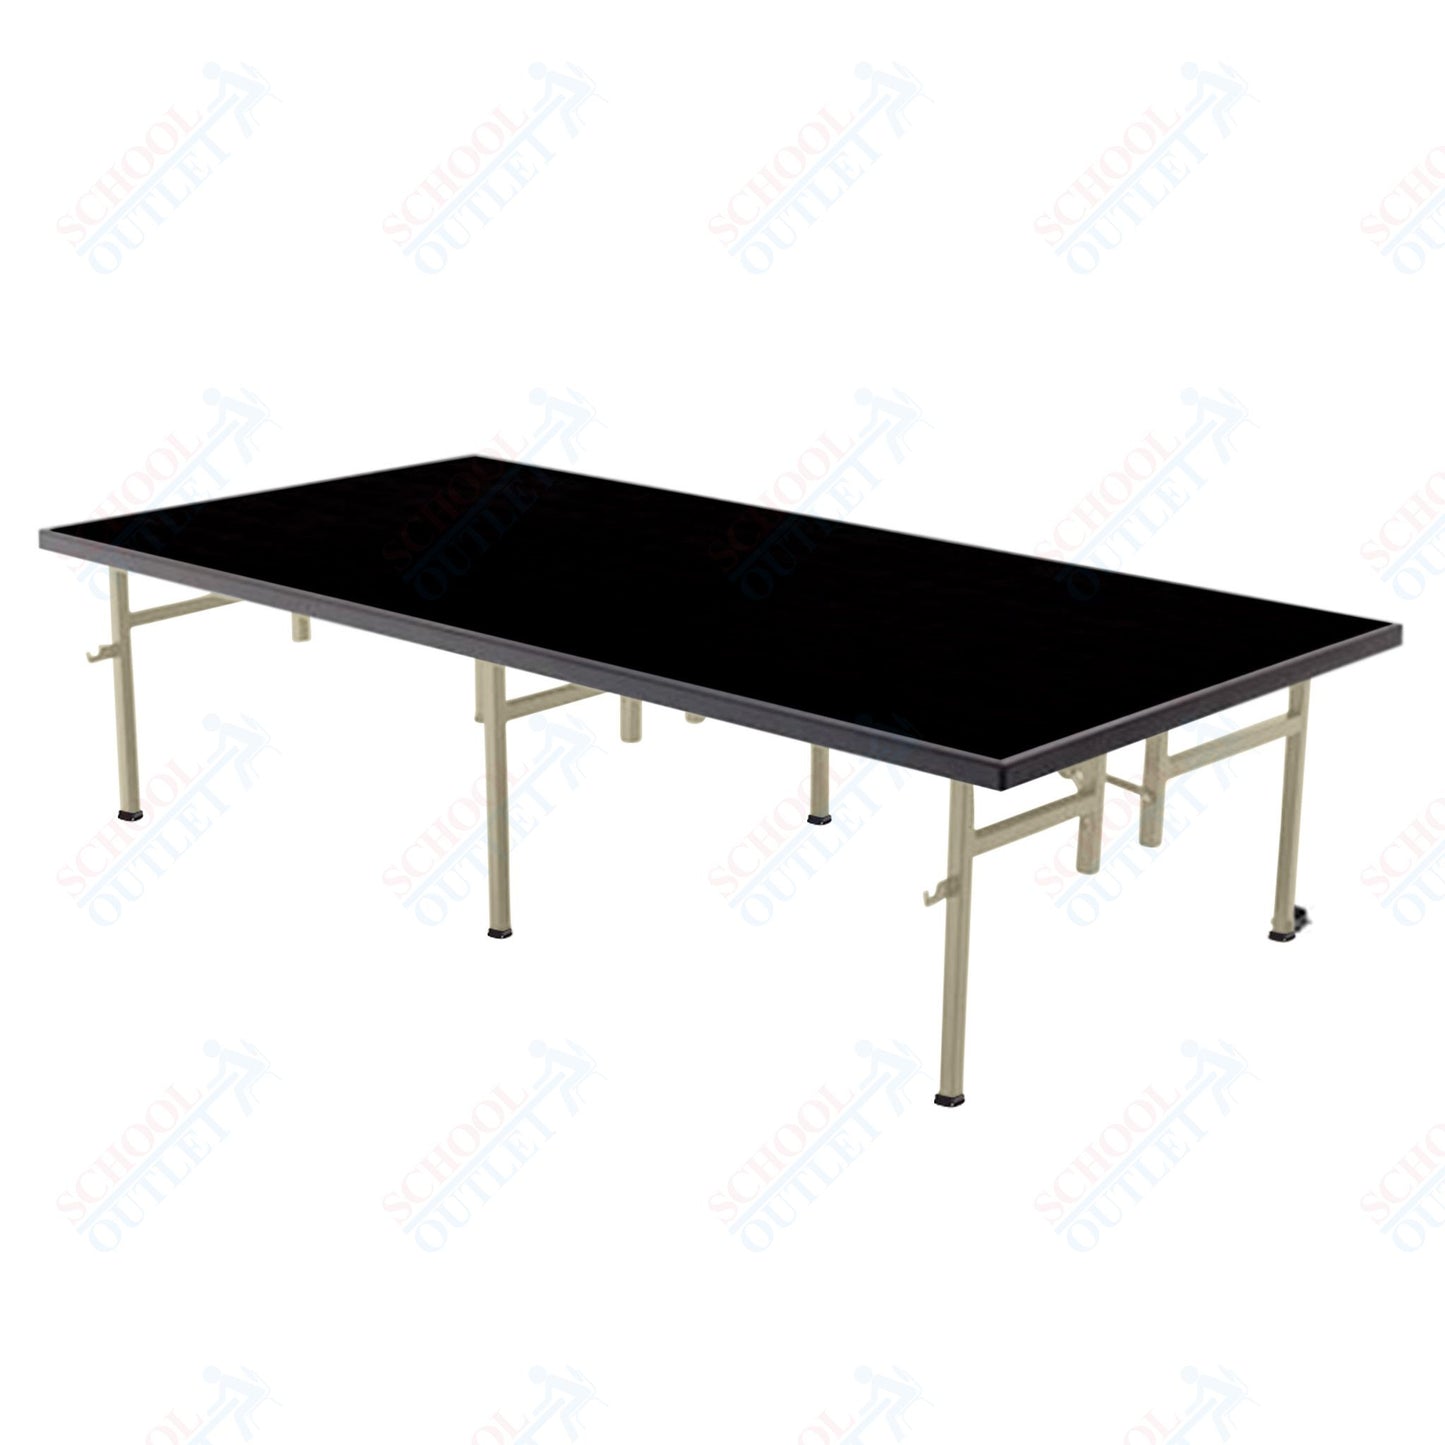 AmTab Fixed Height Stage - Polypropylene Top - 48"W x 72"L x 16"H  (AmTab AMT-ST4616P)